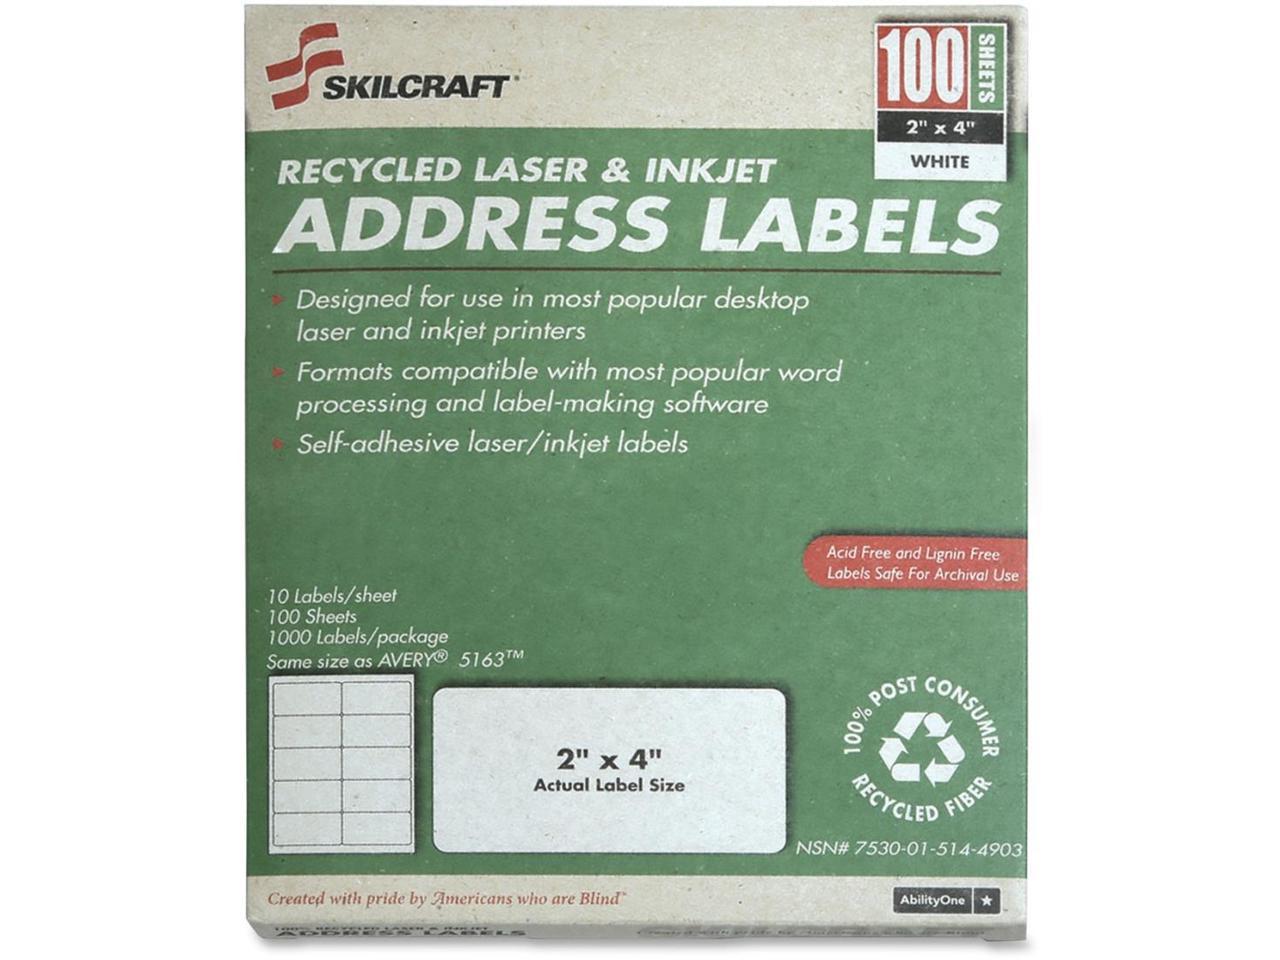 skilcraft-recycled-printer-shipping-labels-newegg